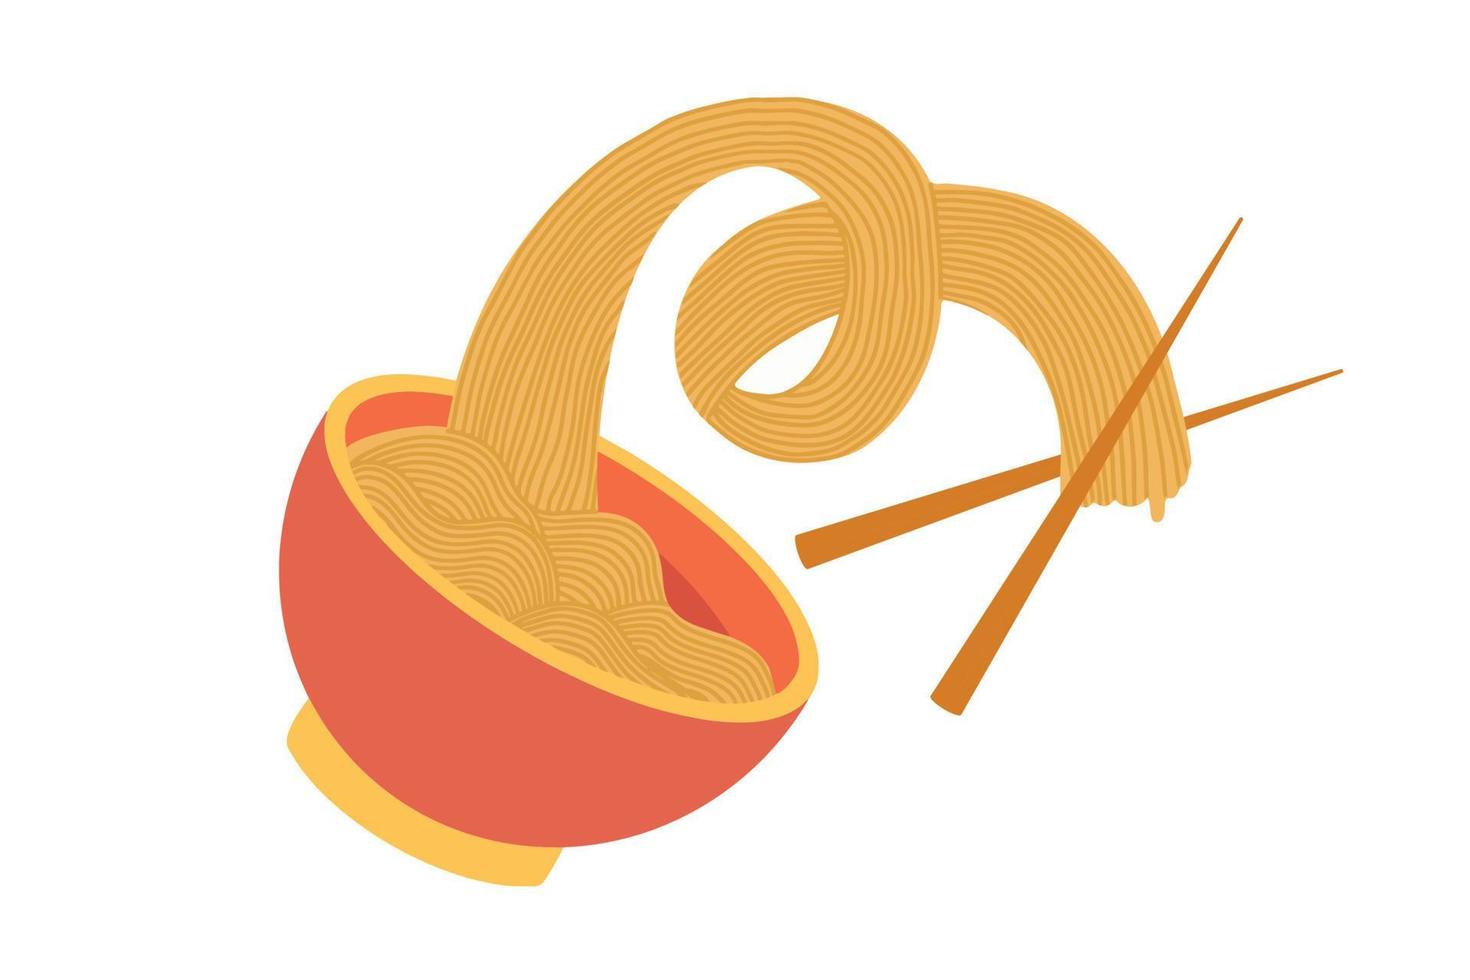 Food with oriental noodles. Asian noodles isolated on a white background, image of a traditional Chinese ramen restaurant with pasta and chopsticks, vector illustration.